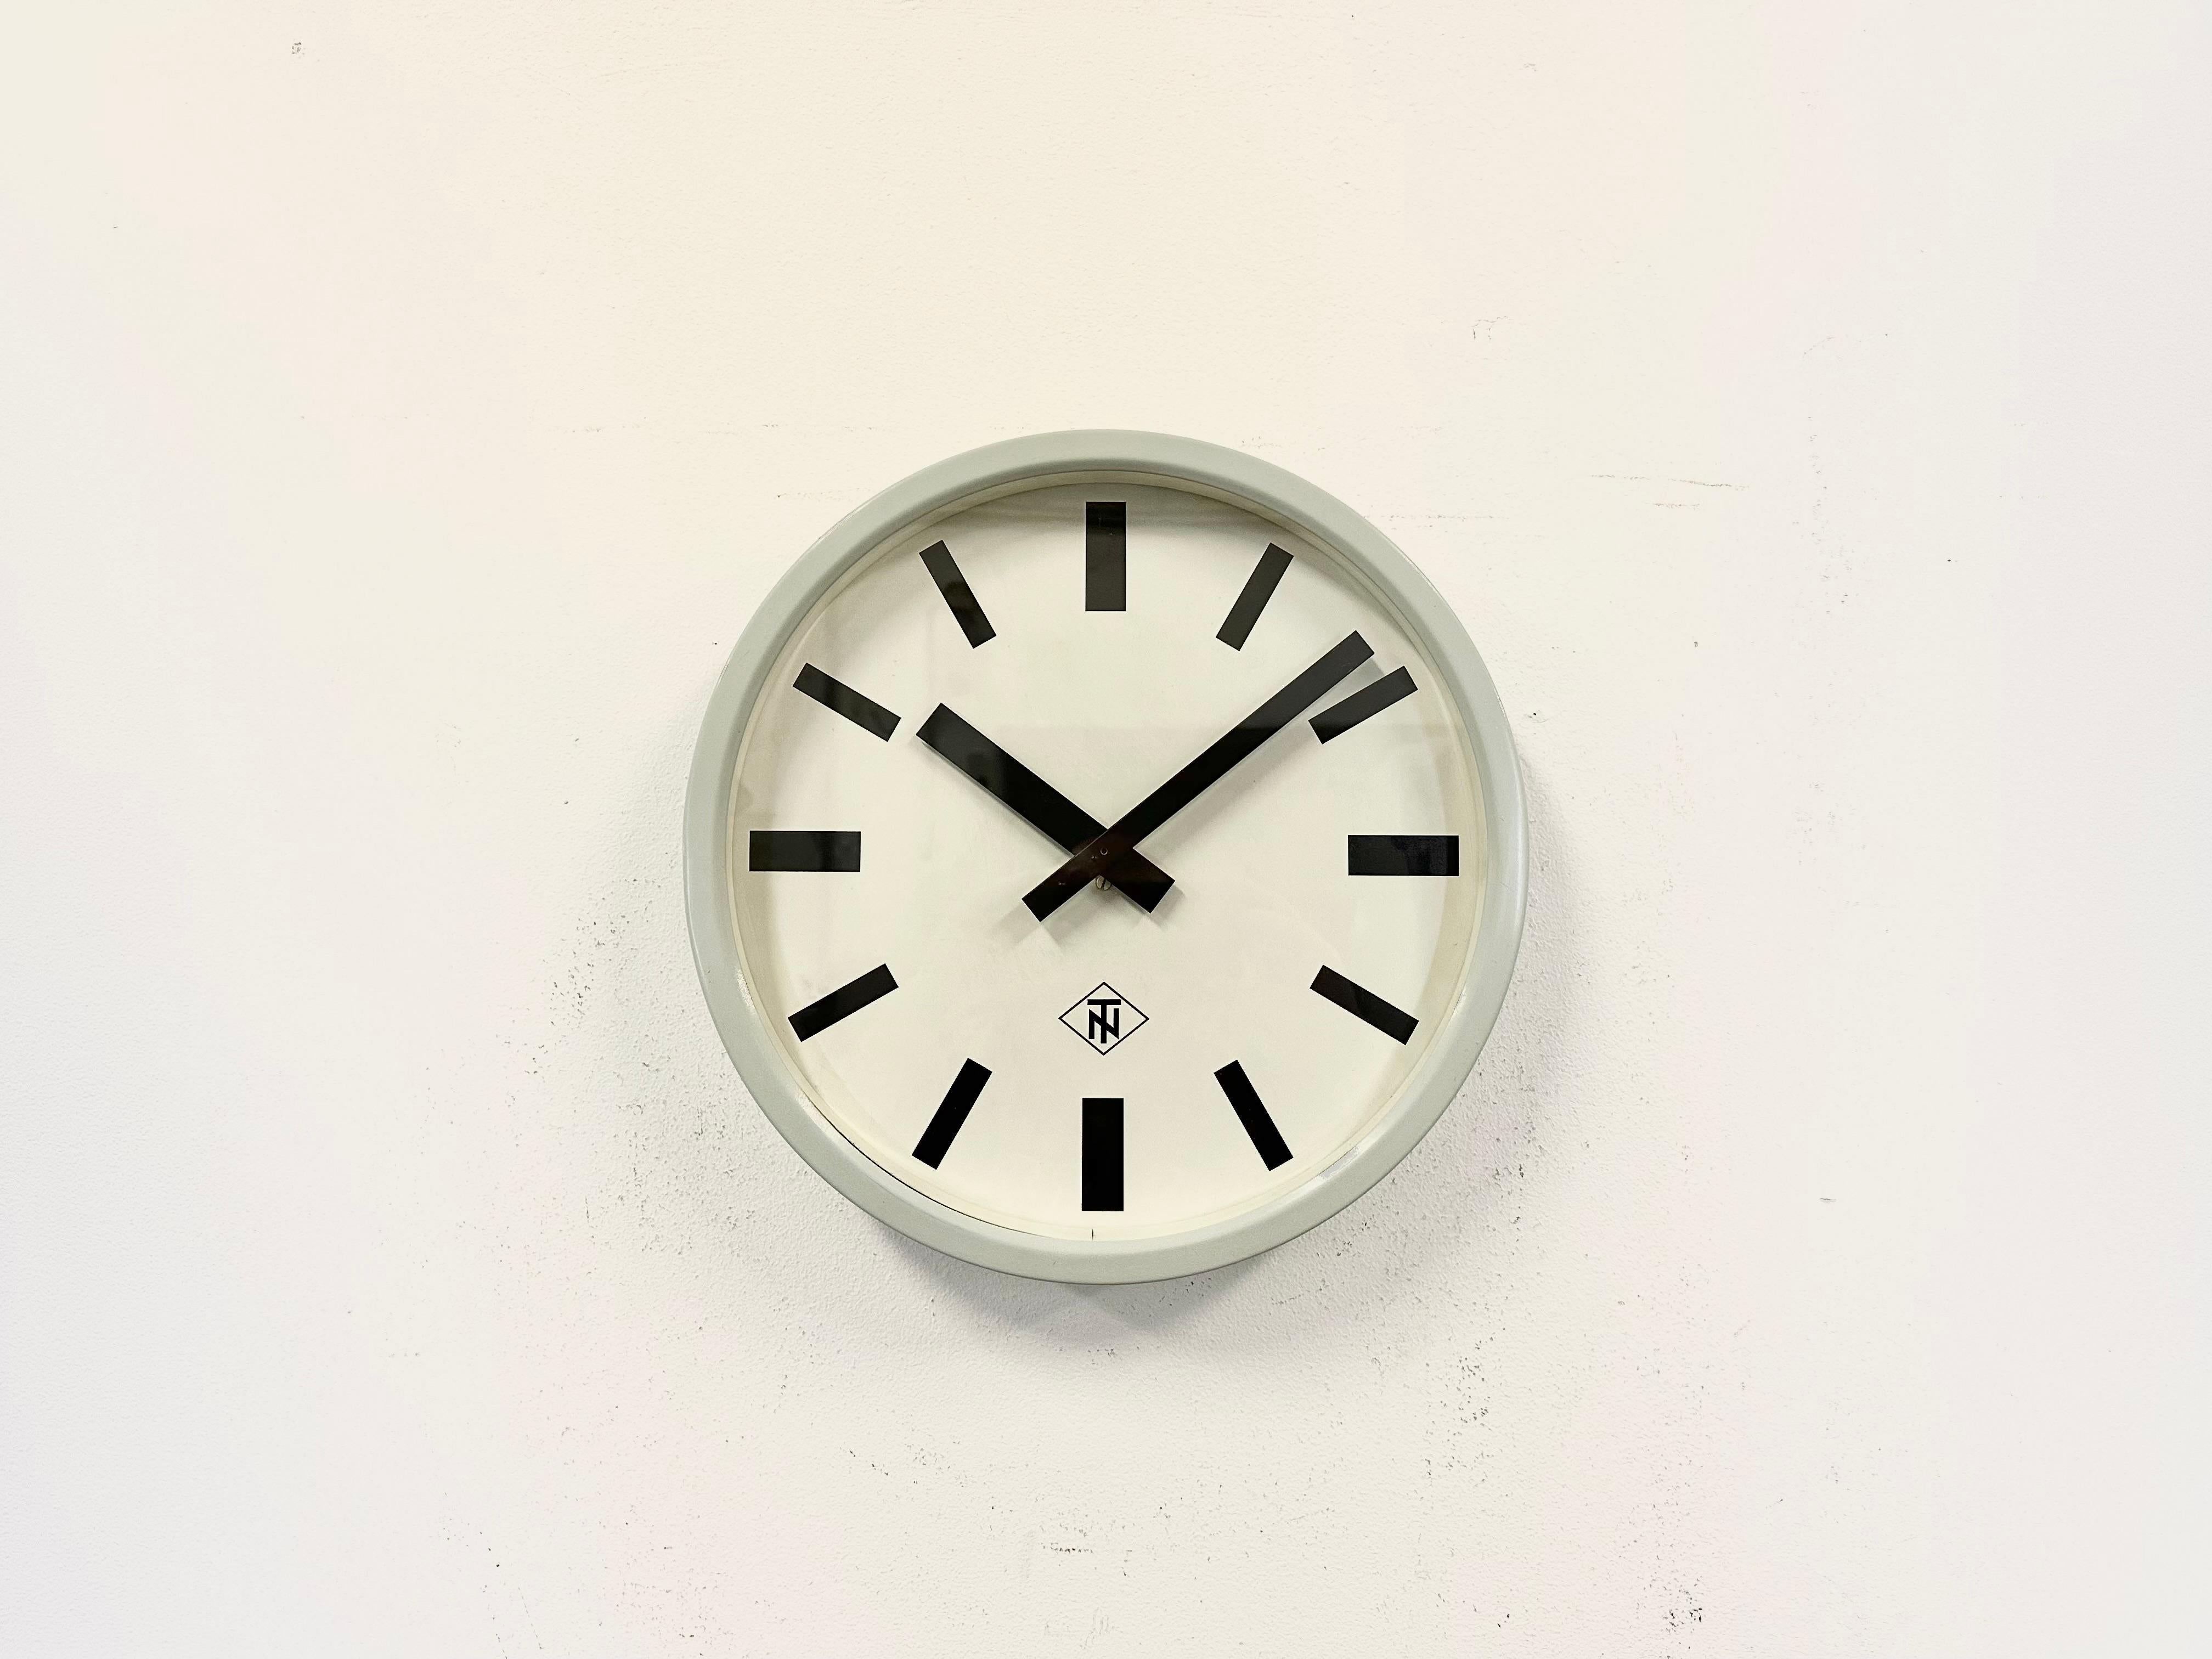 Wall clock produced by TN Telefonbau und Normalzeit in Germany during the 1960s. It features a grey iron frame, a white metal dial, an aluminium hands and a clear glass cover. The piece has been converted into a battery-powered clockwork and